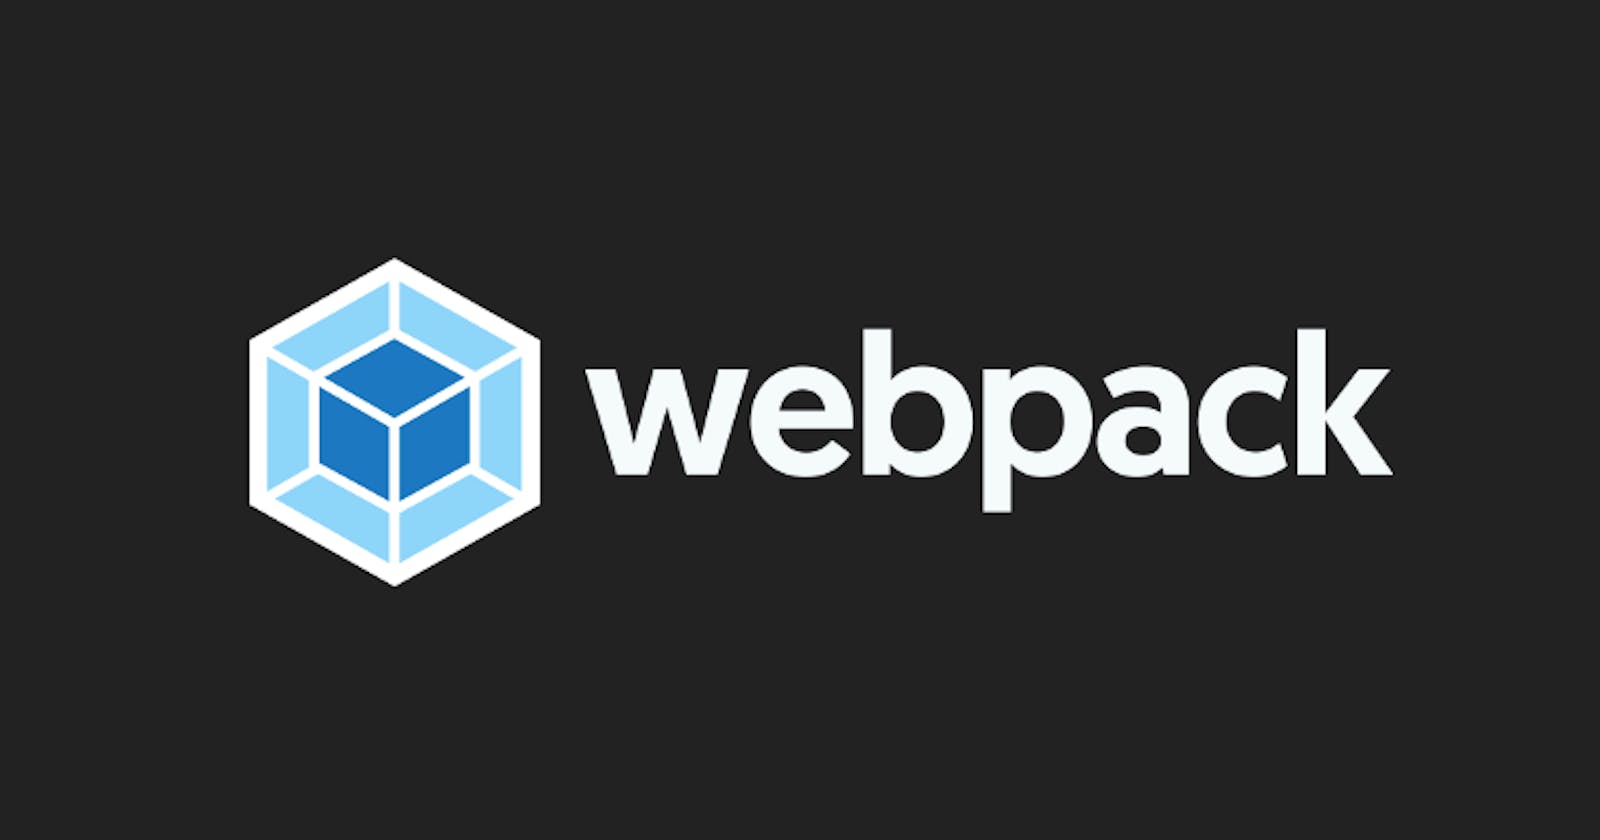 A Basic Introduction to Webpack